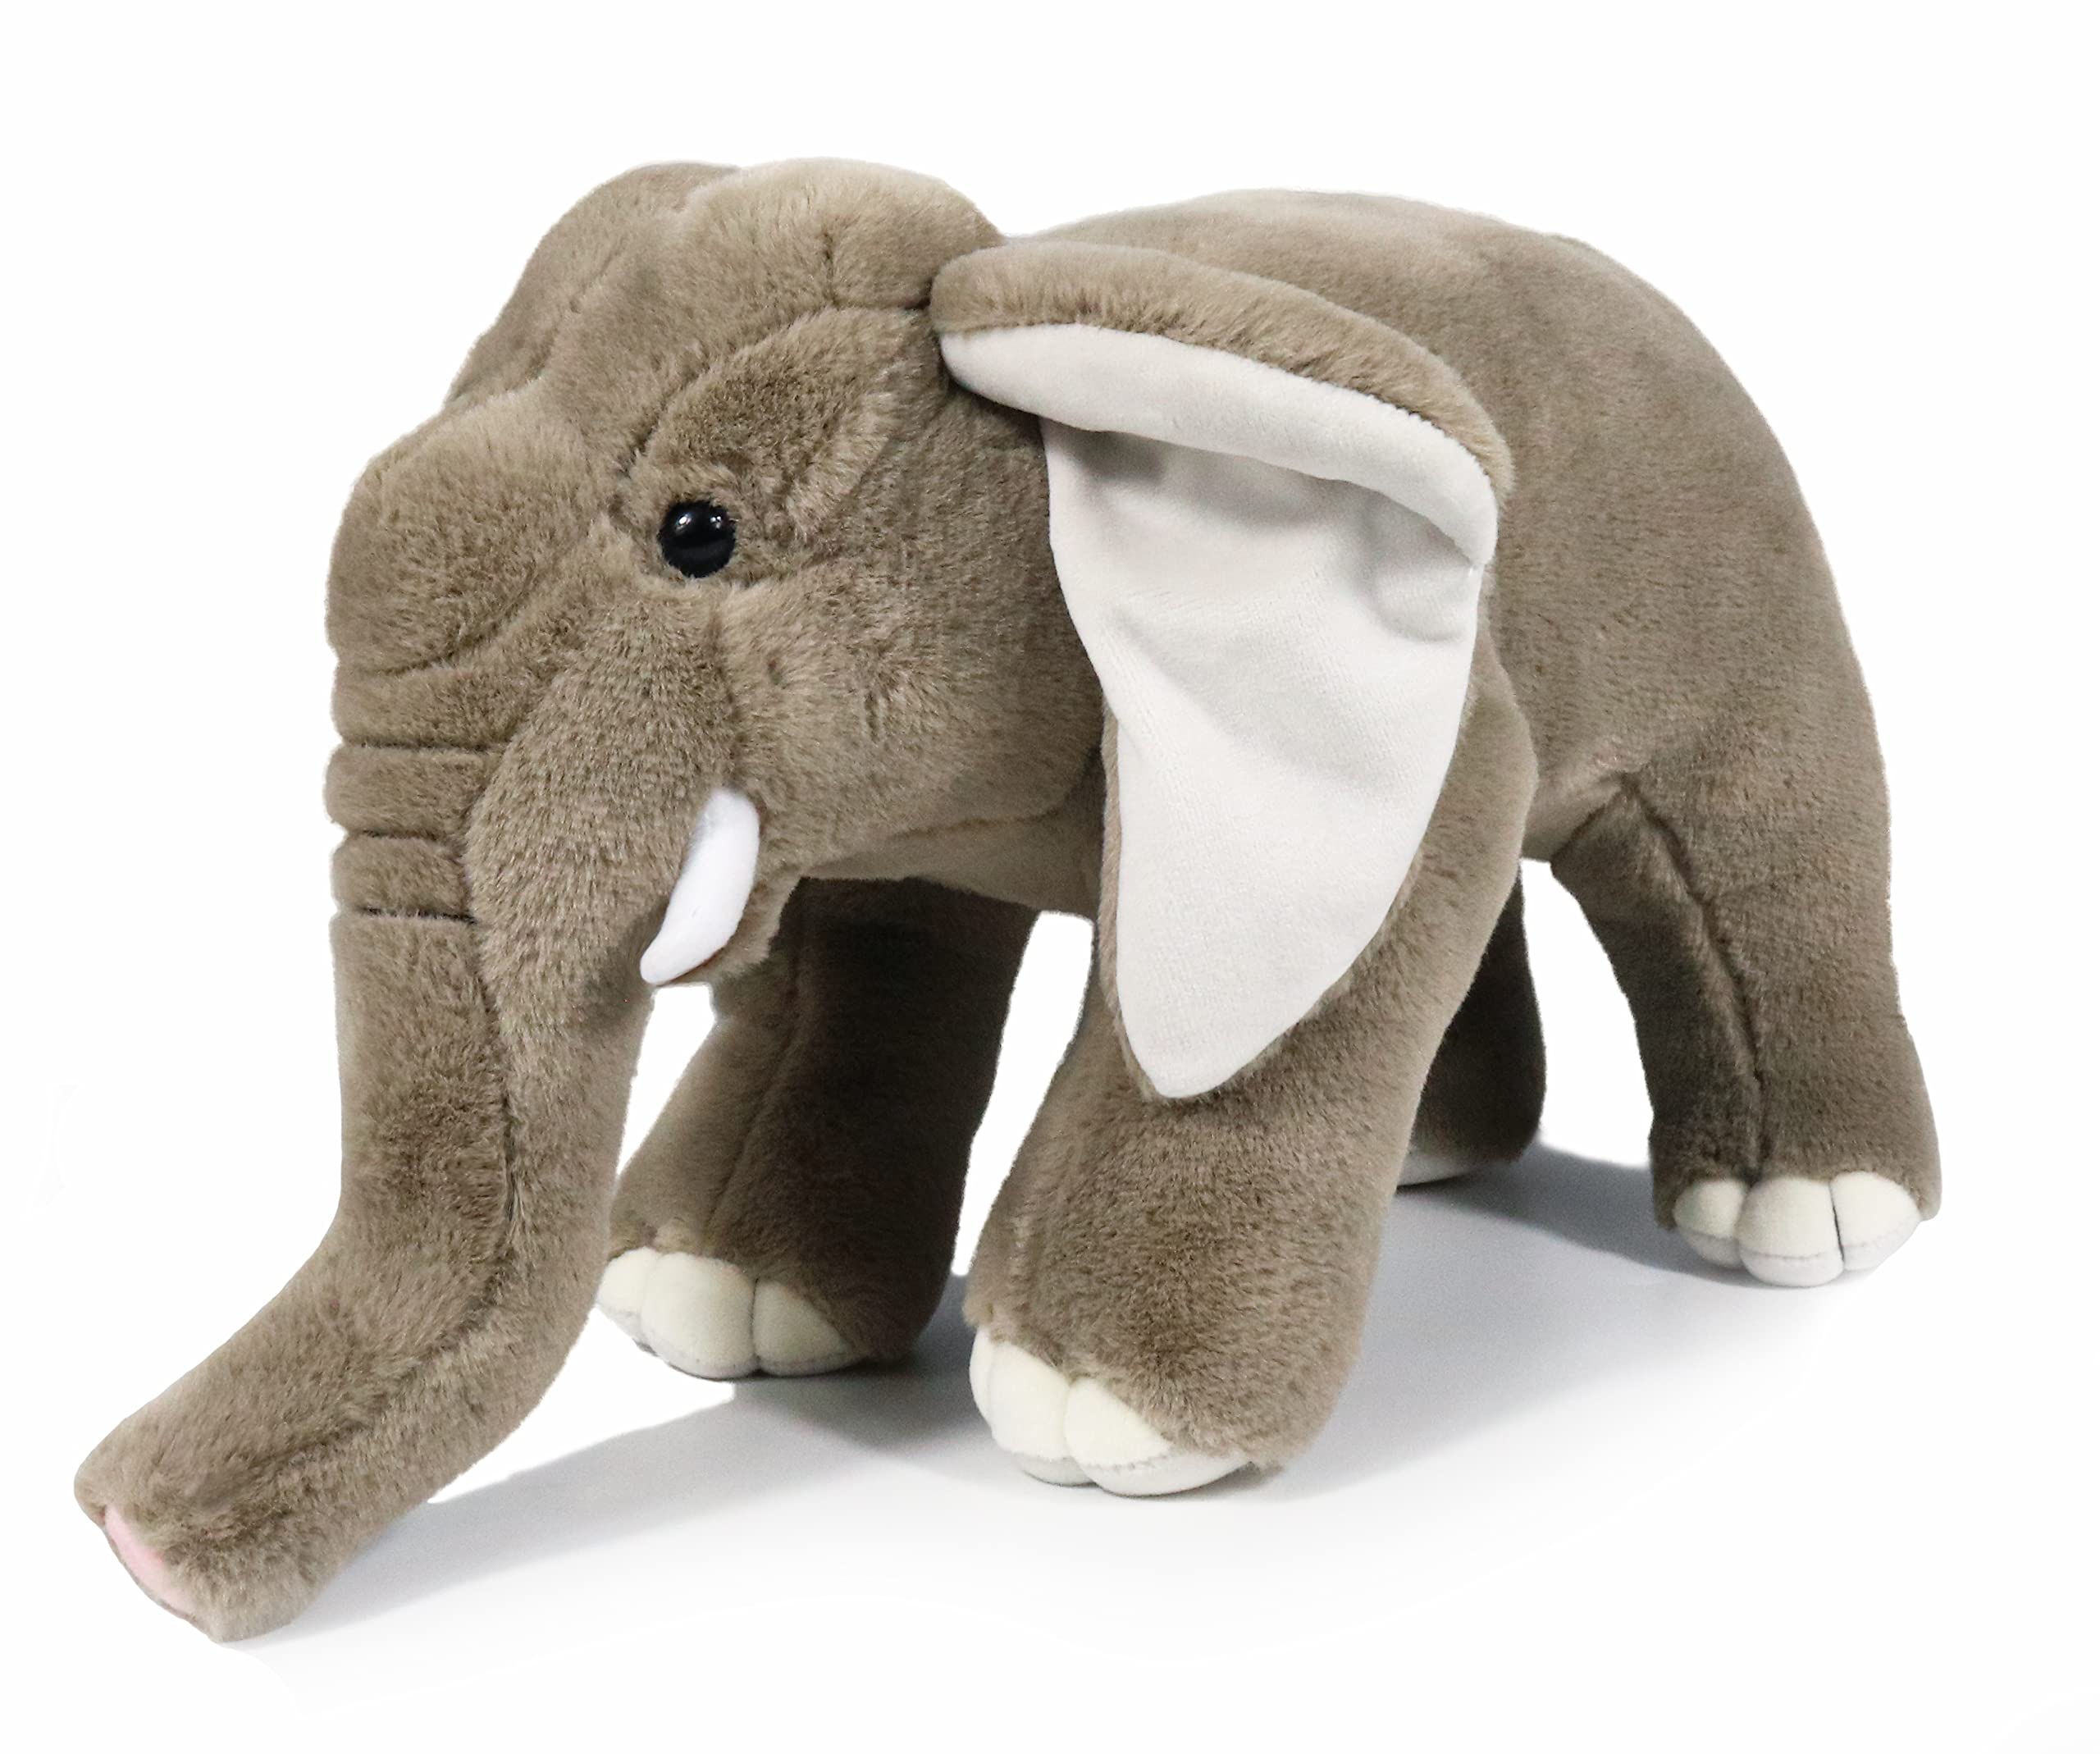 Are you looking for a massive, larger-than-life stuffed elephant. Here are 10 of the biggest stuffed elephants on the market